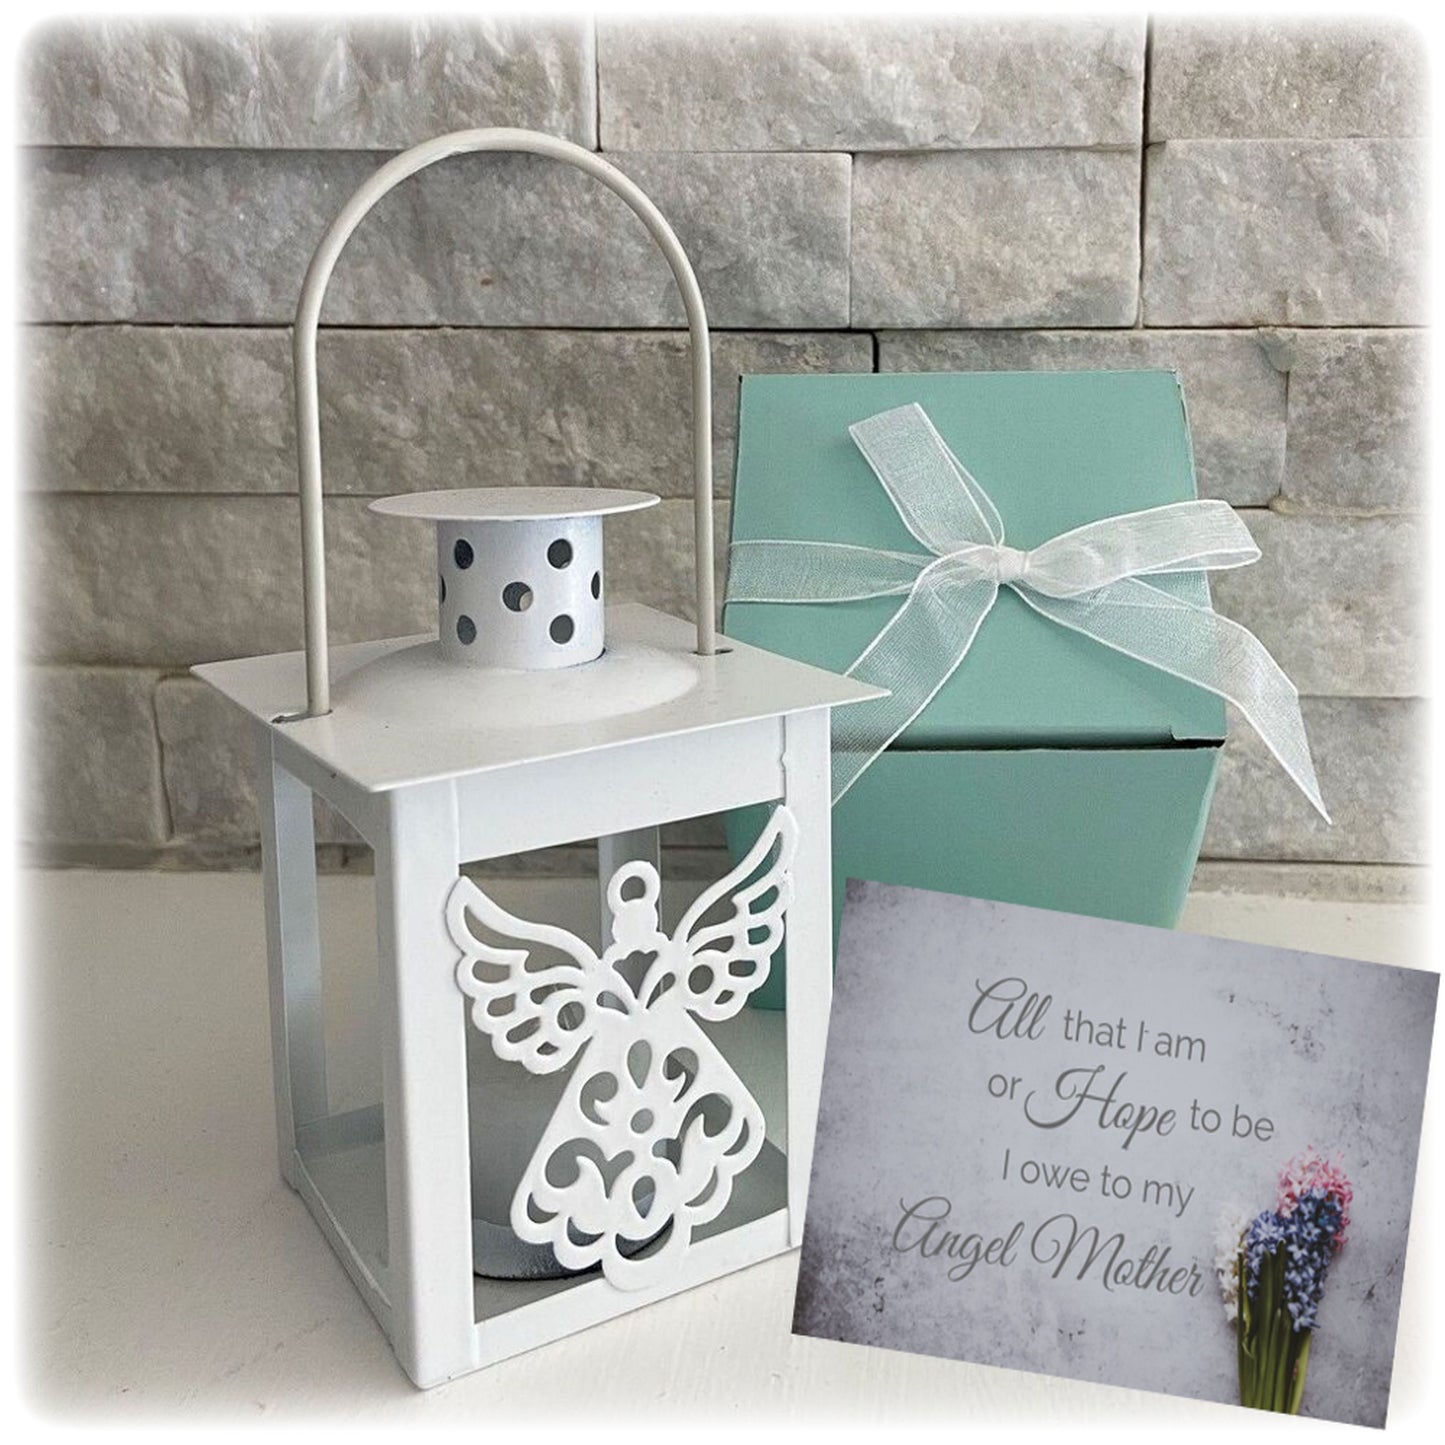 Angel Mother Christmas or Birthday Gift, Mini Lantern Candleholder with LED Candle and Refrigerator Magnet